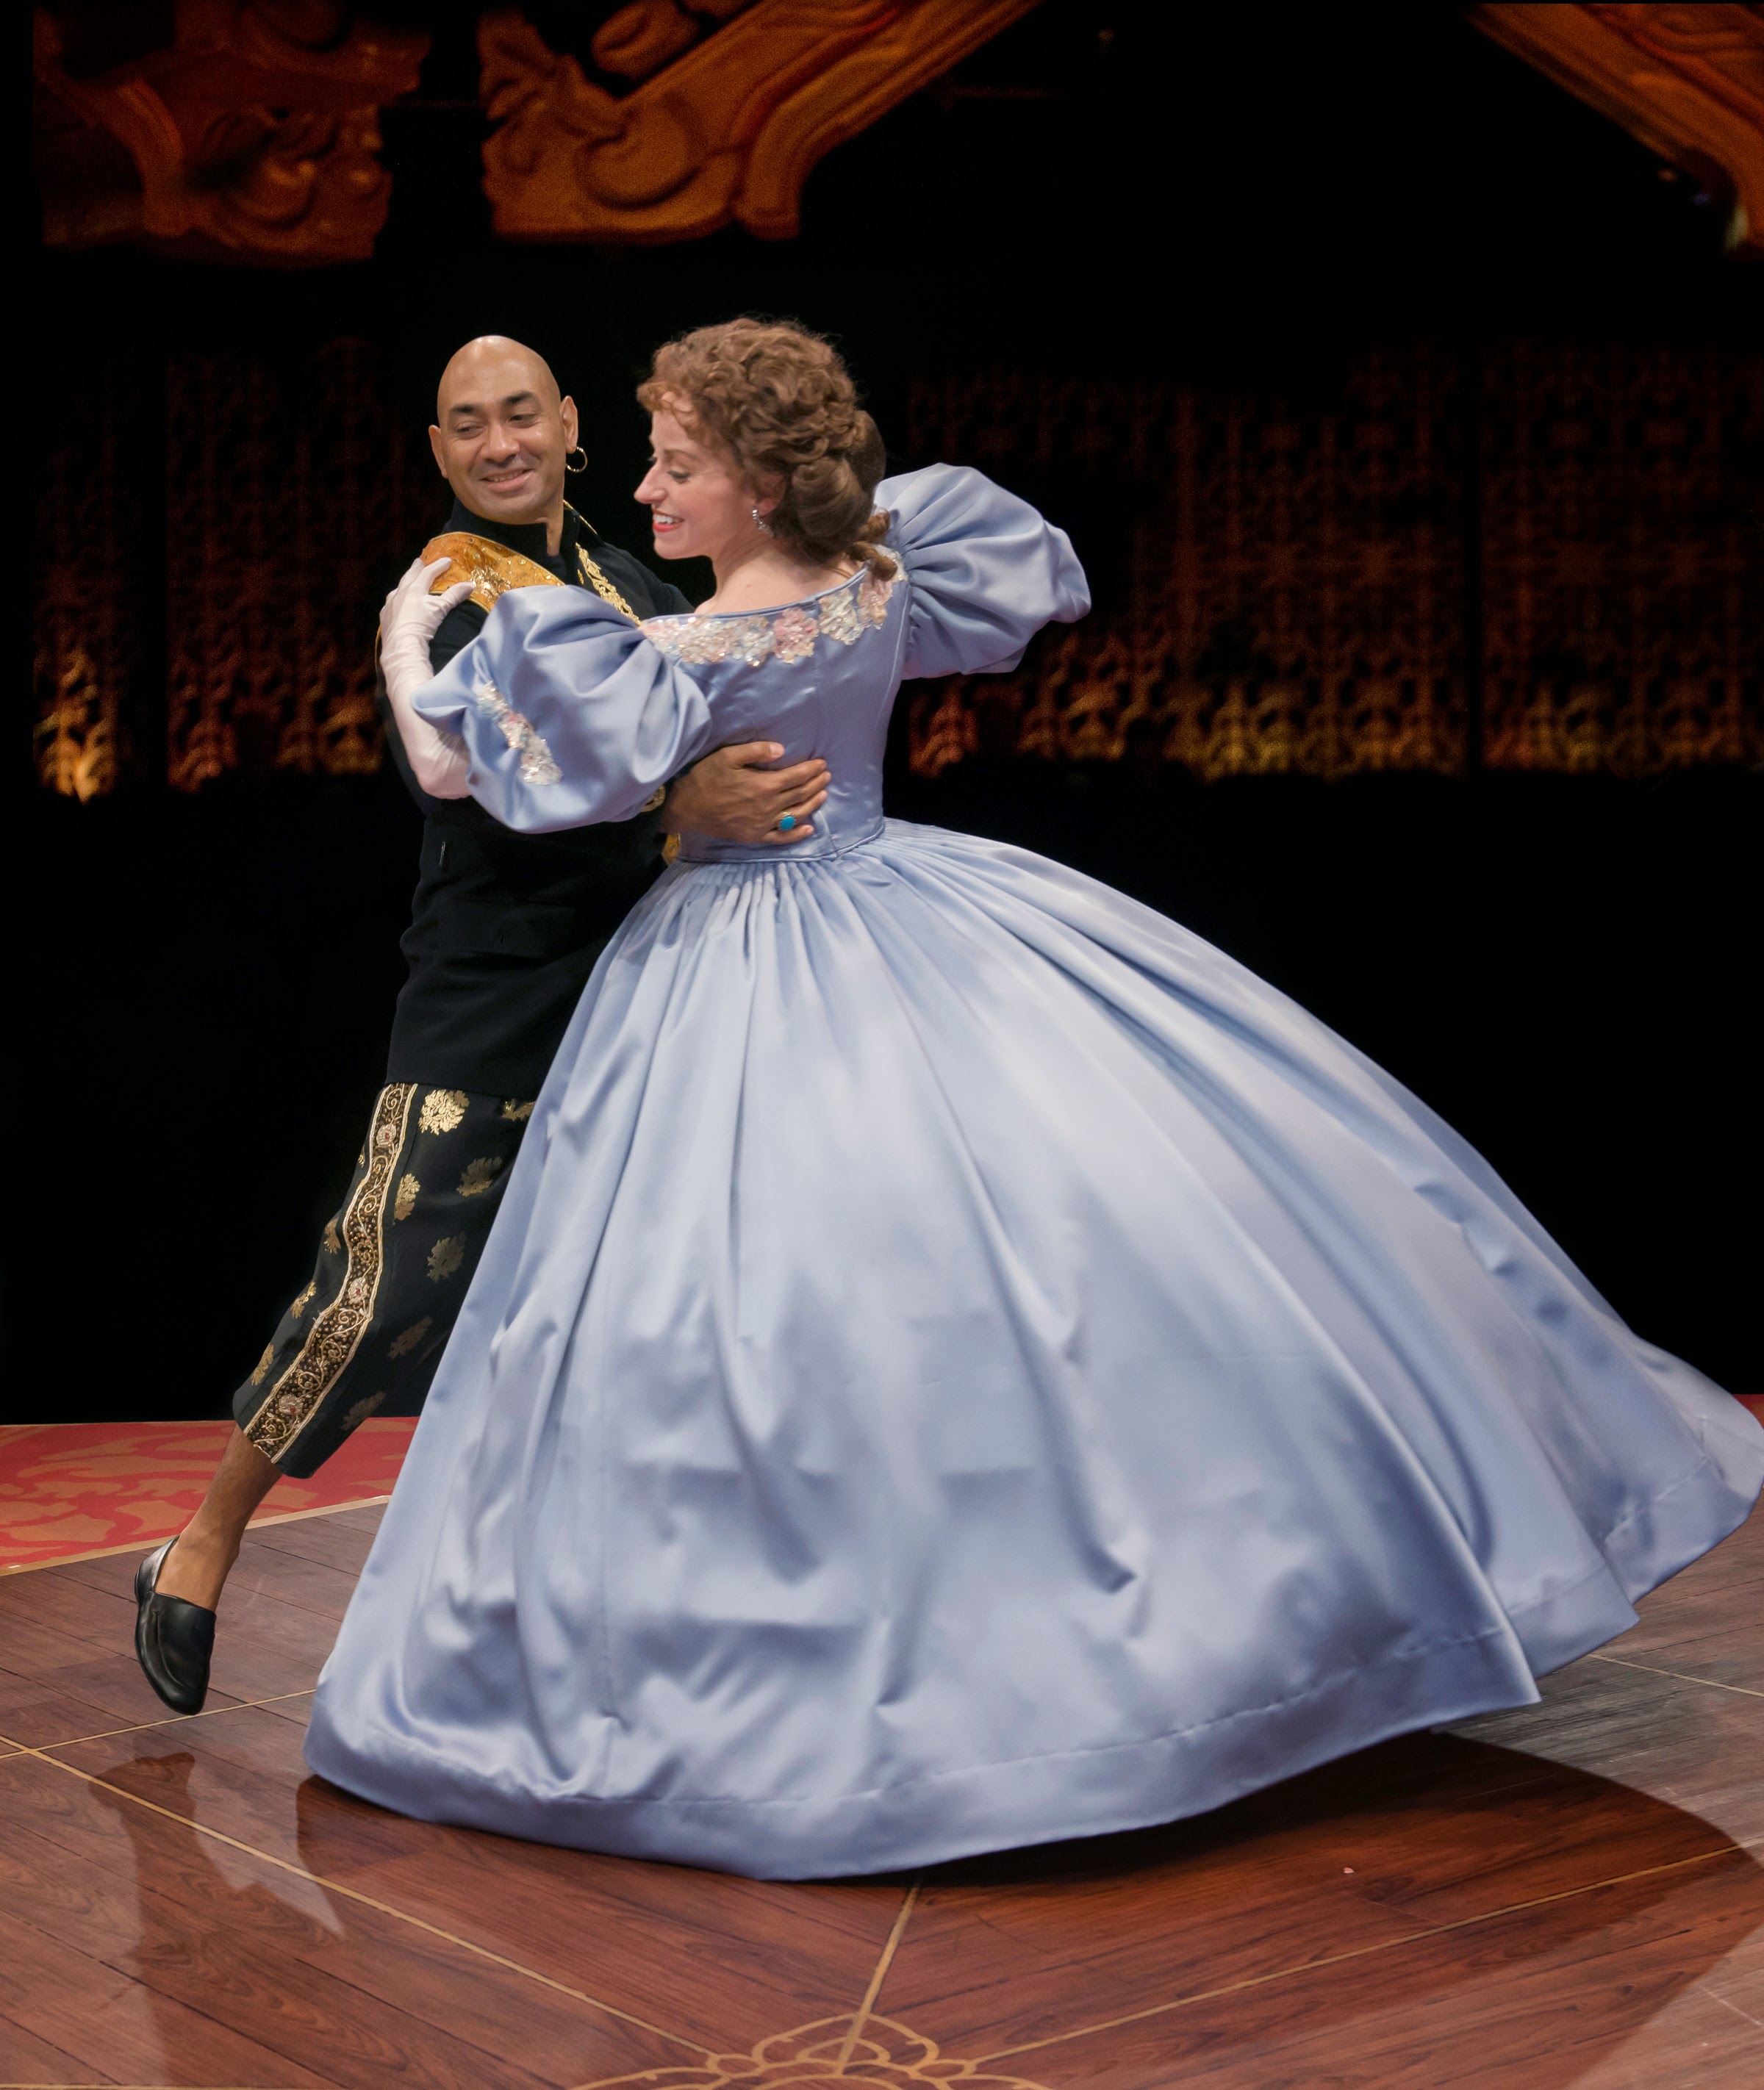 Marriott’s "THE KING & I" Lacks Royal Splendor 1 Recommended: Theatre In Chicago Review Round-Up